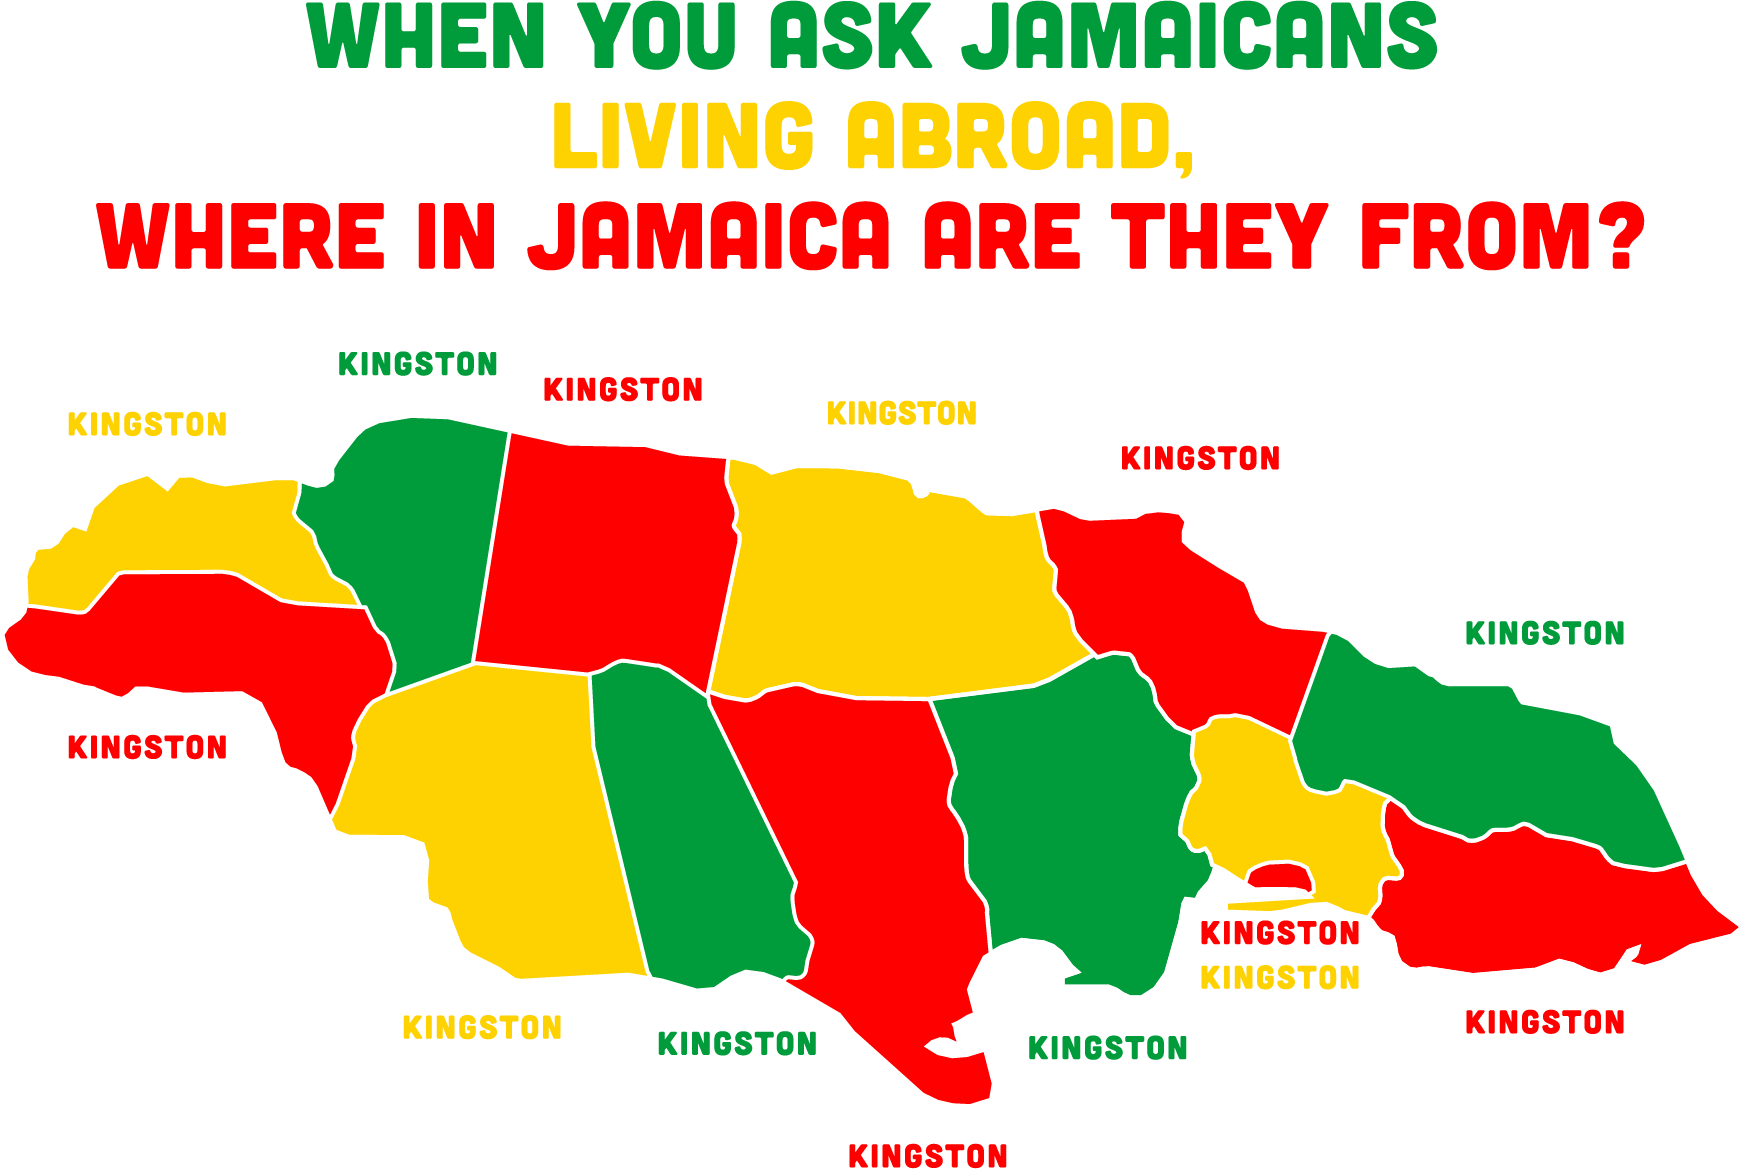 Every area in the map of Jamaica being called Kingston